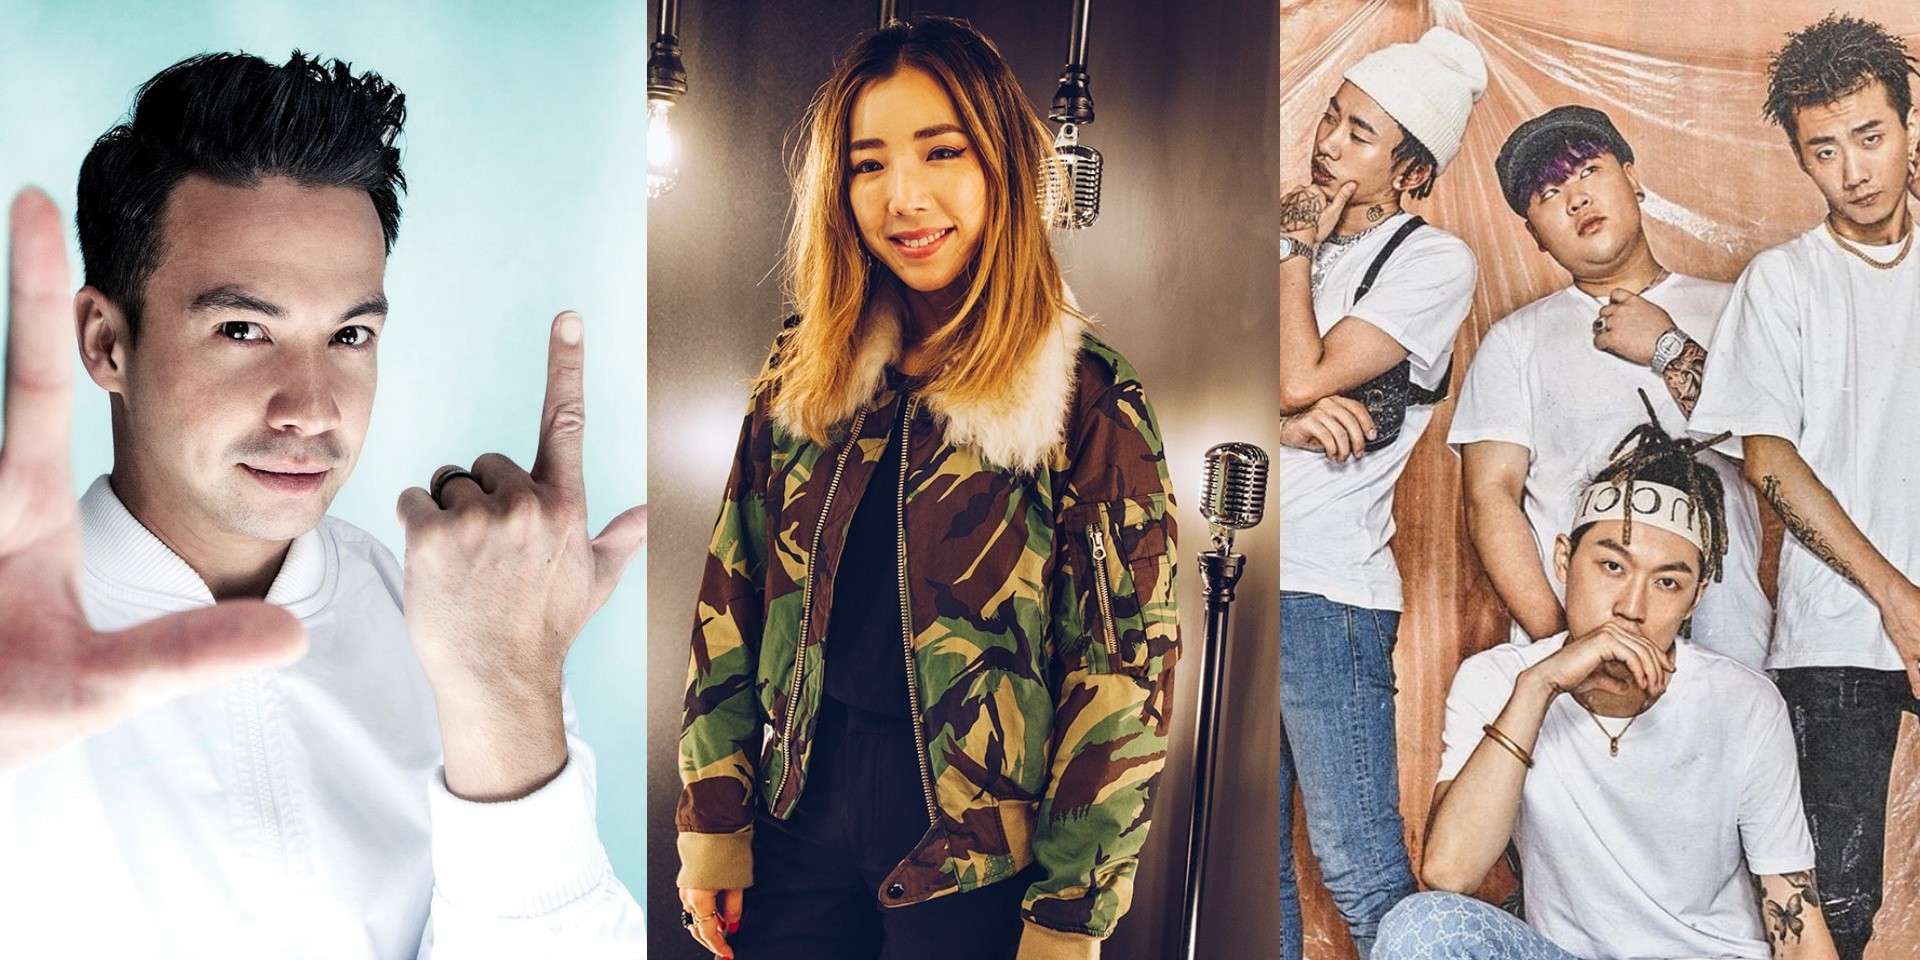 Here's why you can't miss the Skechers Sundown Festival 2019